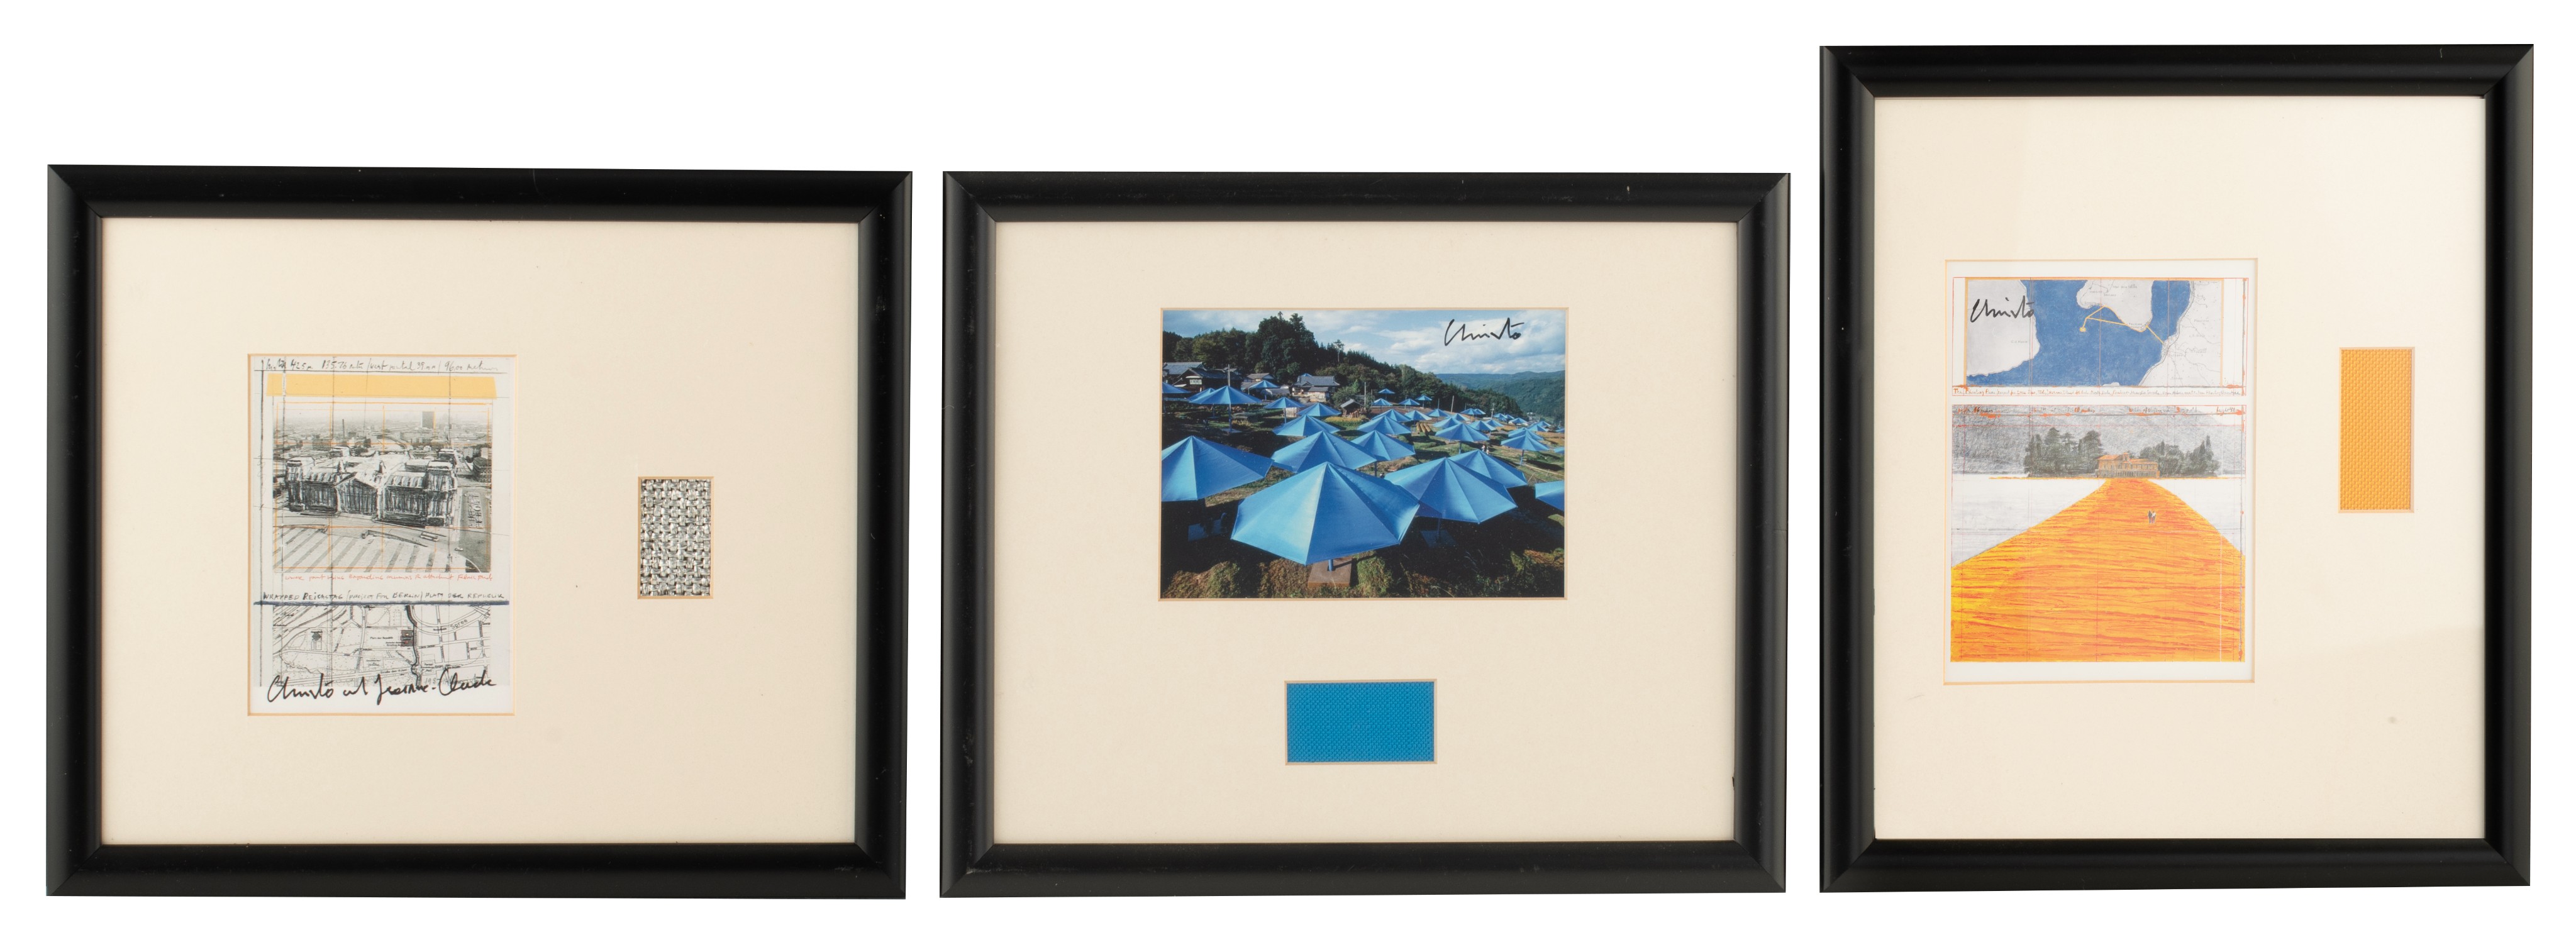 (BIDDING ONLY ON CARLOBONTE.BE) Christo and Jeanne-Claude, three signed offsets of their famous proj - Image 2 of 8